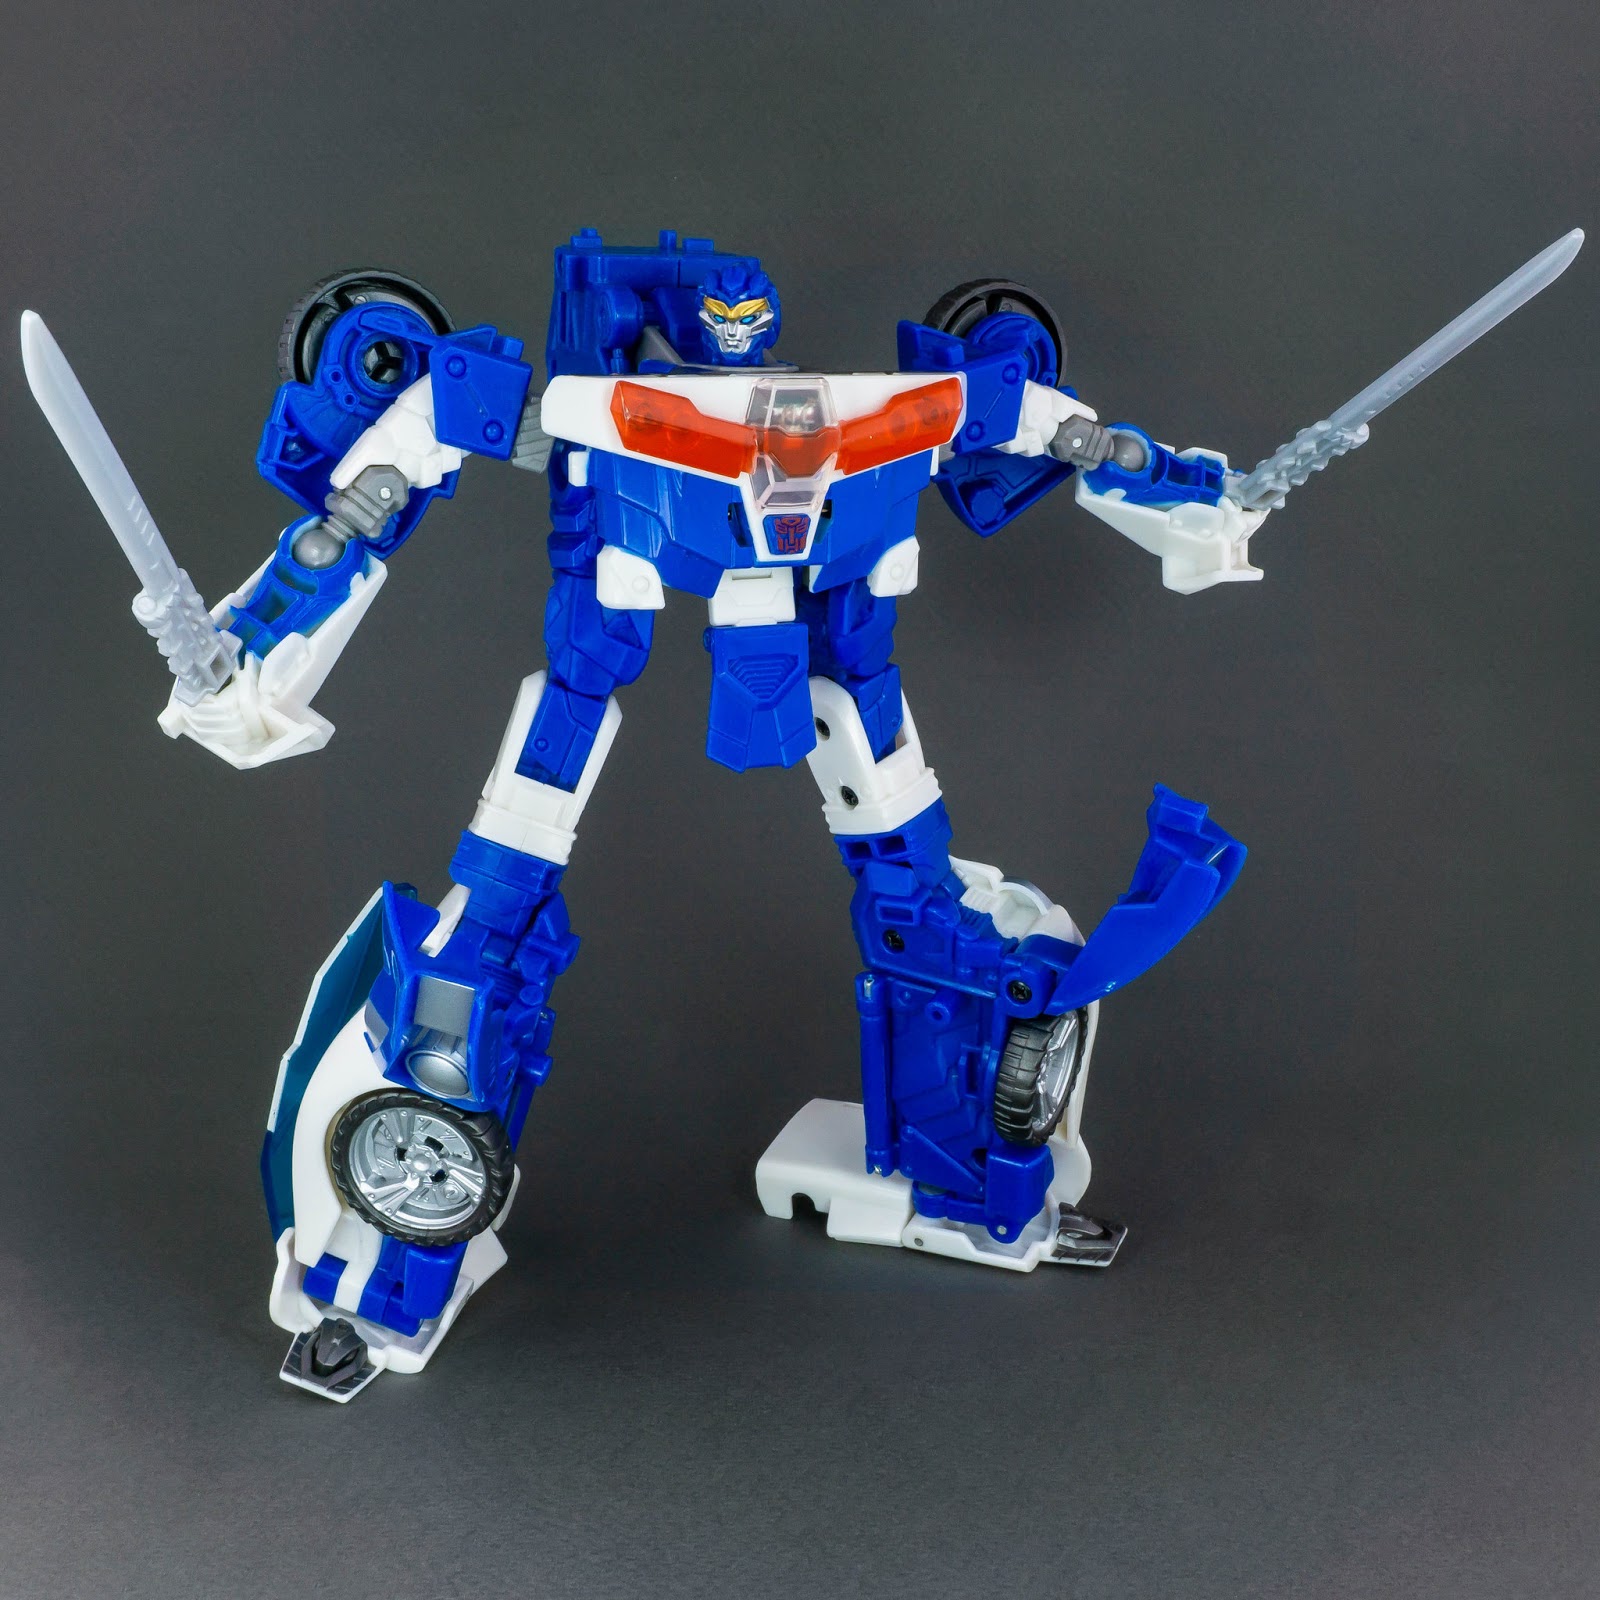 Transformers Go Kenzan robot mode with swords posed 1